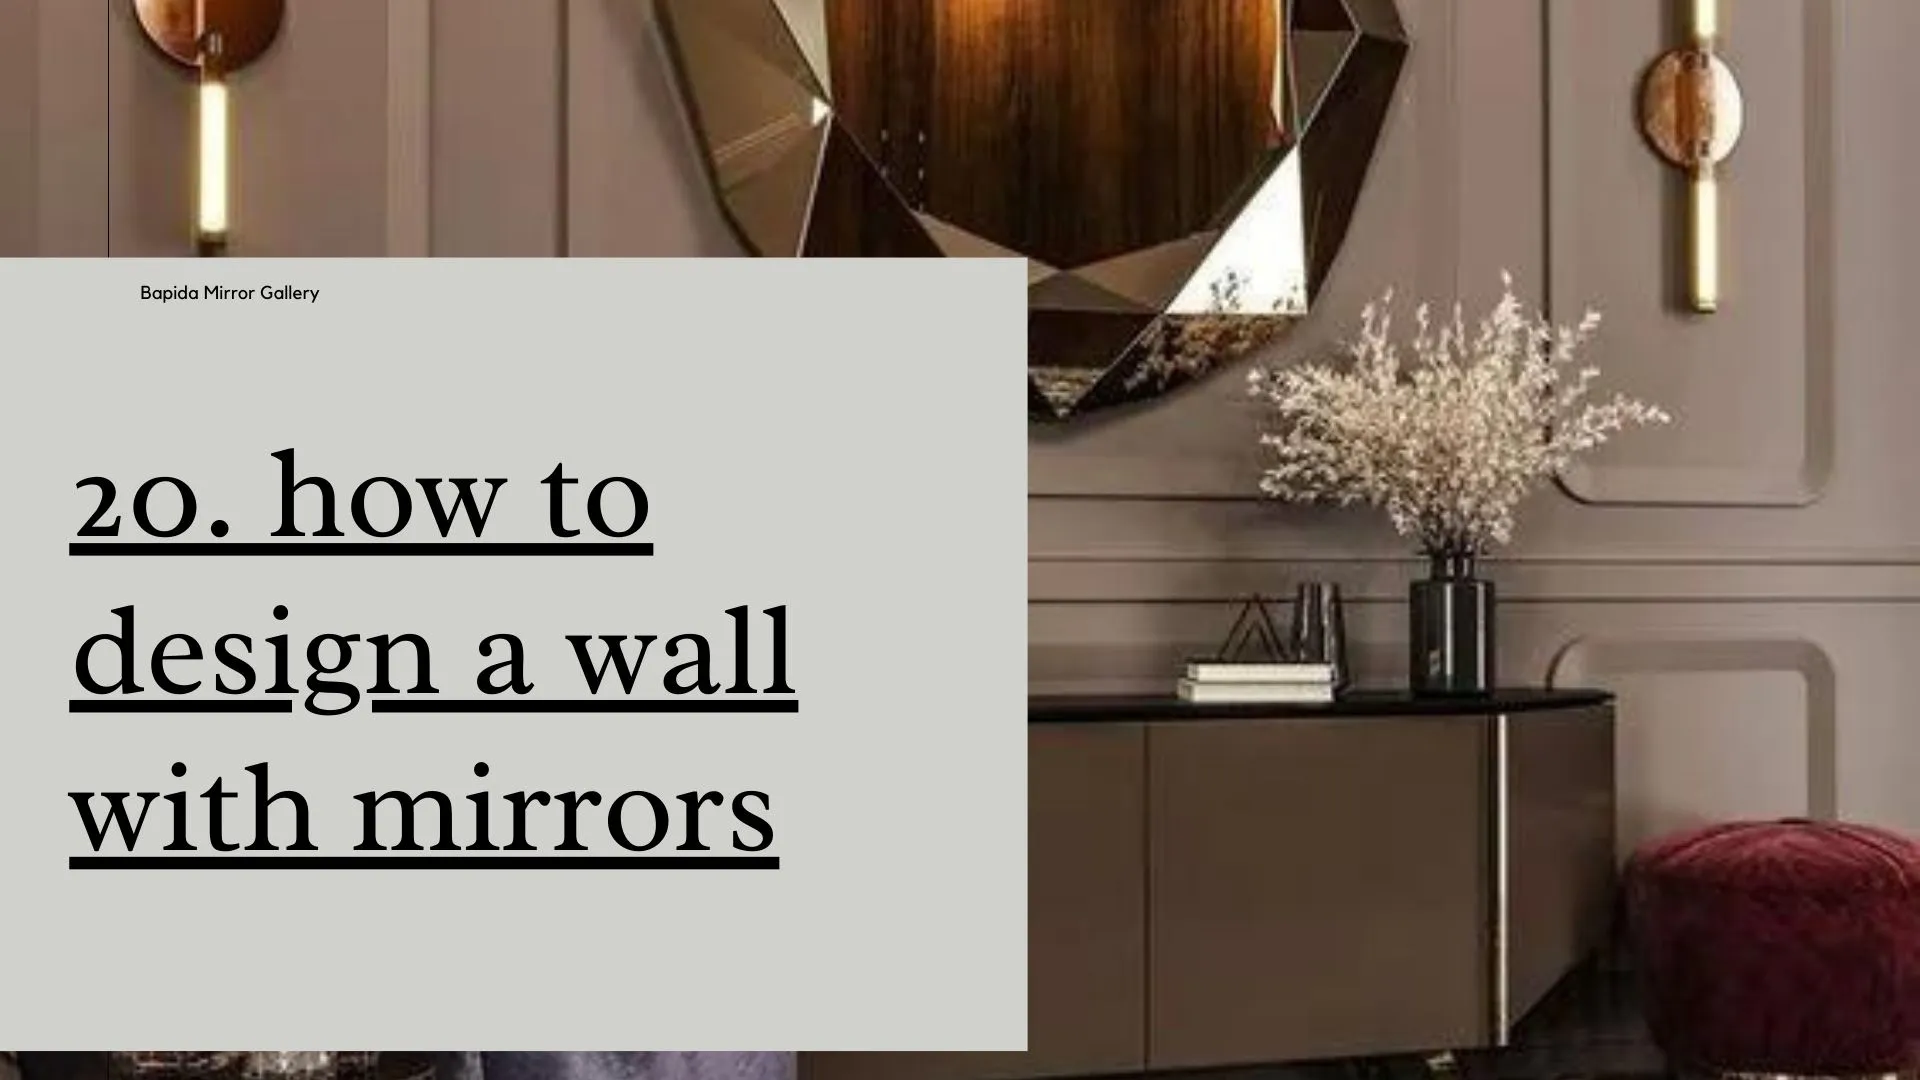 How to Design a Wall with Mirrors